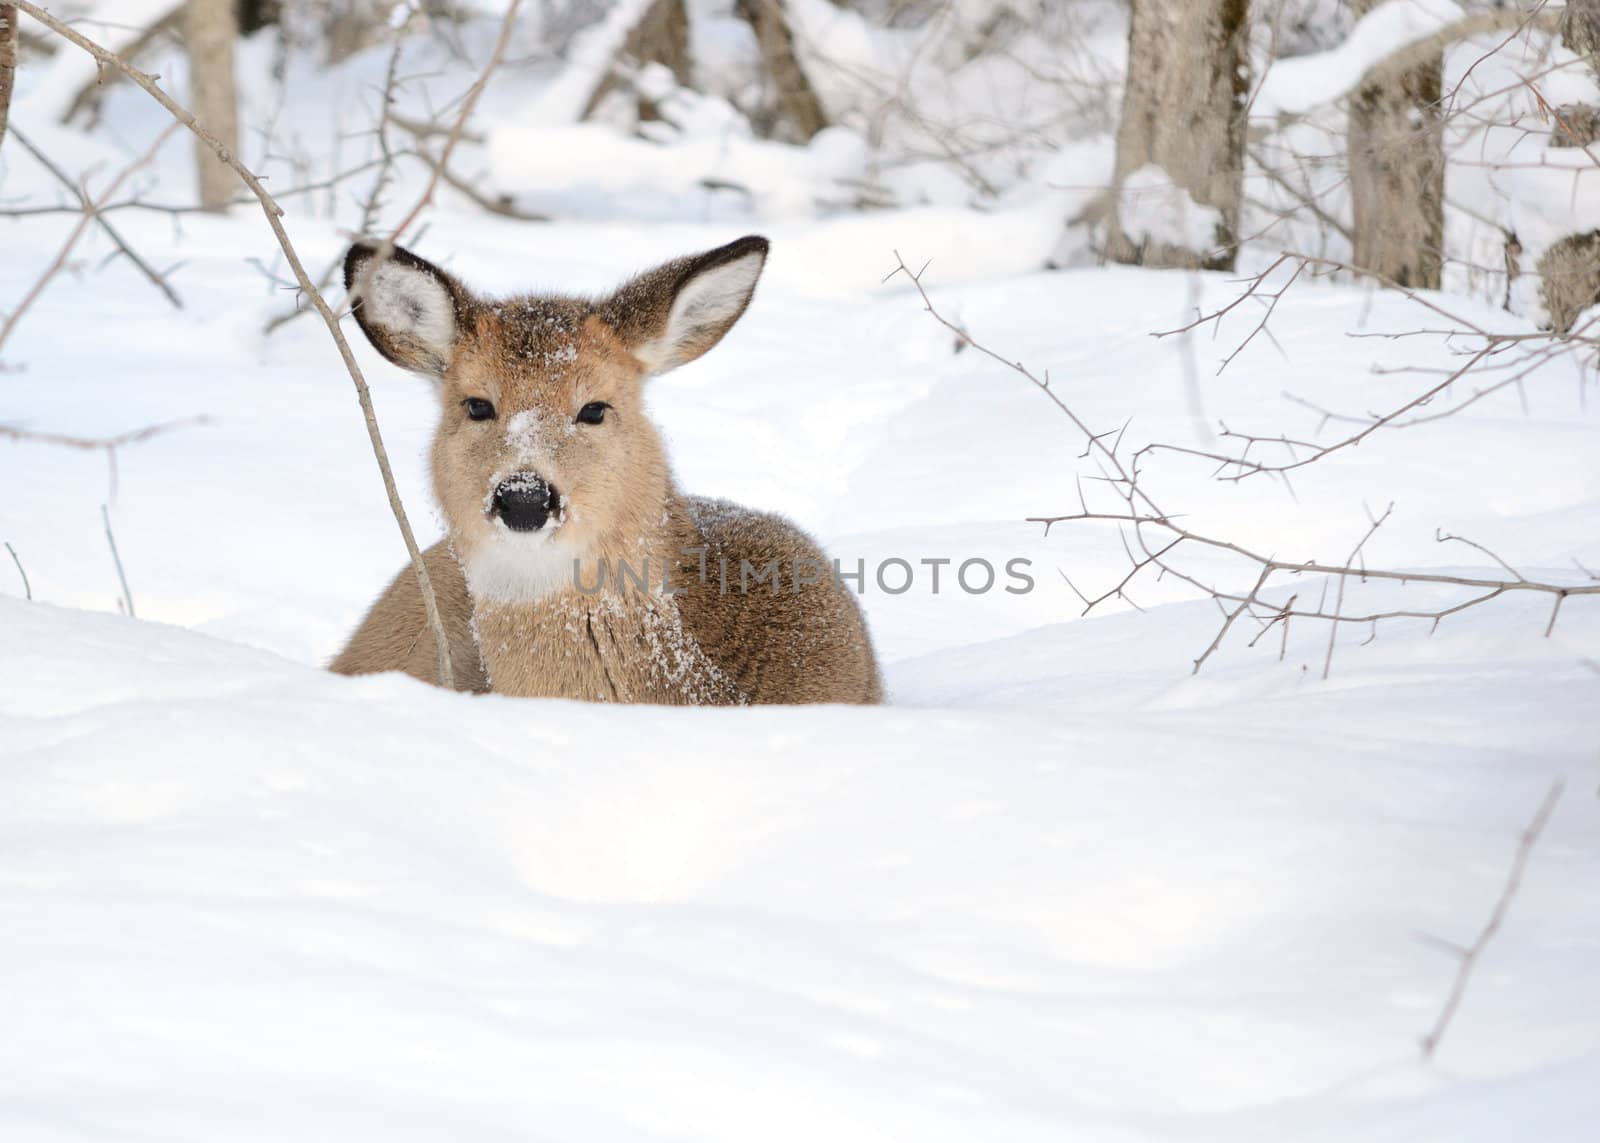 Whitetail deer yearling bedded in the woods in winter snow.